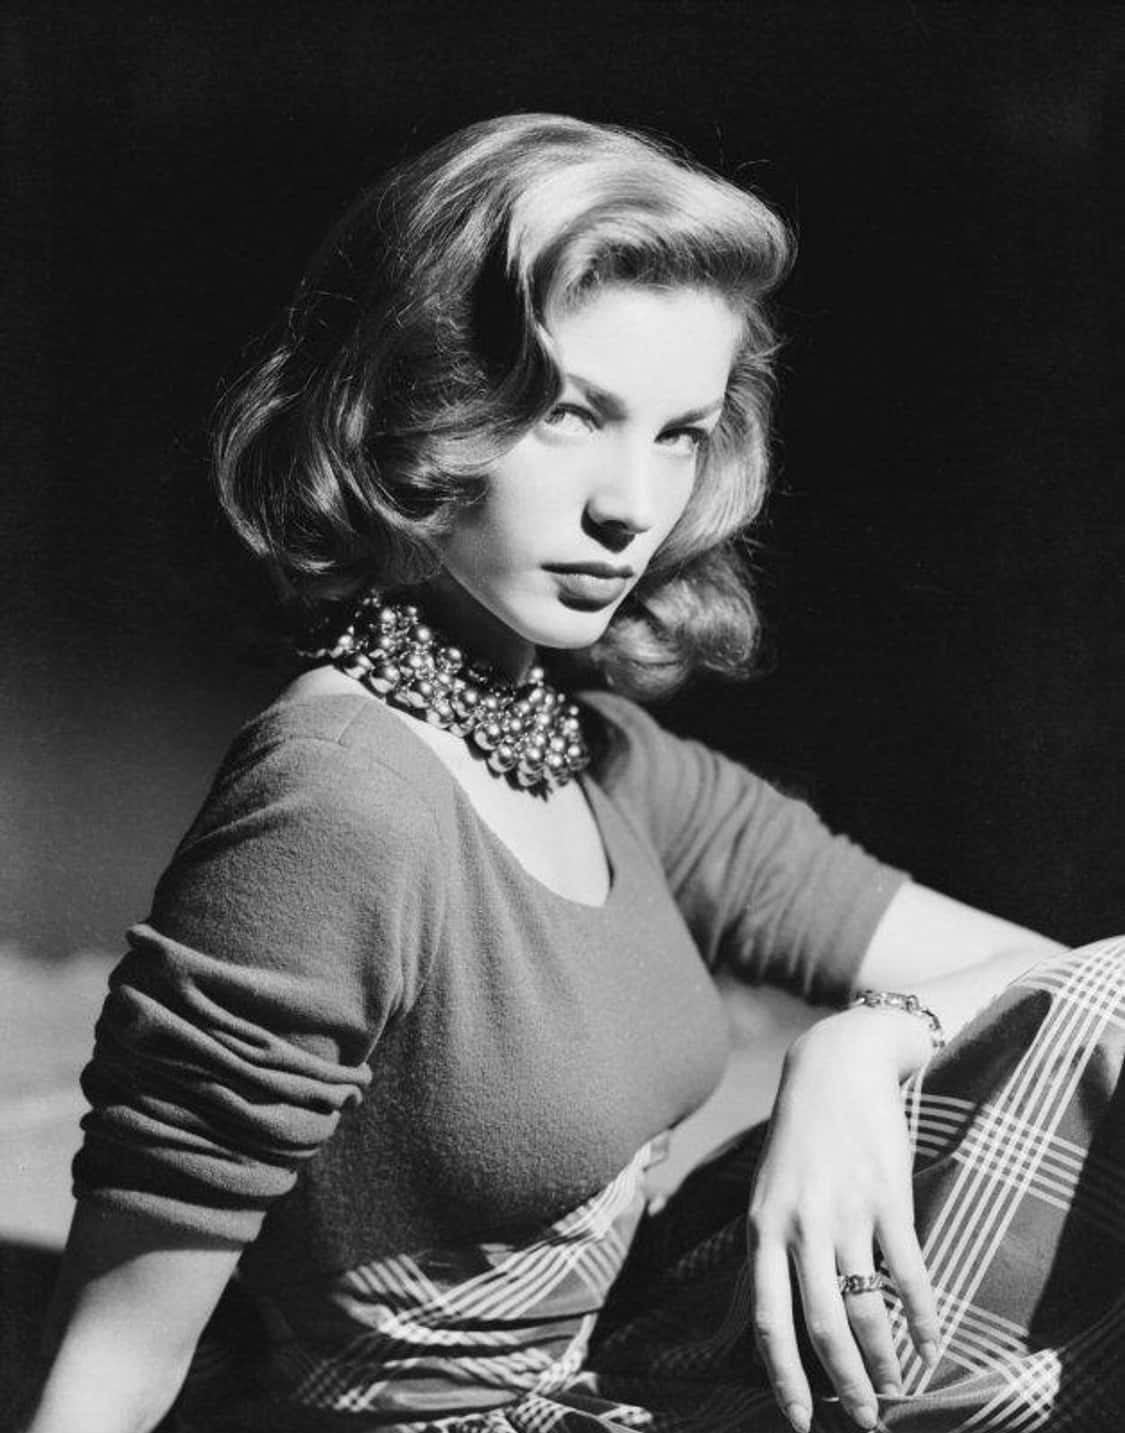 lauren-bacall-recording-artists-and-groups-photo-u5?auto=format&fit=crop&fm=pjpg&w=375&q=60&dpr=3